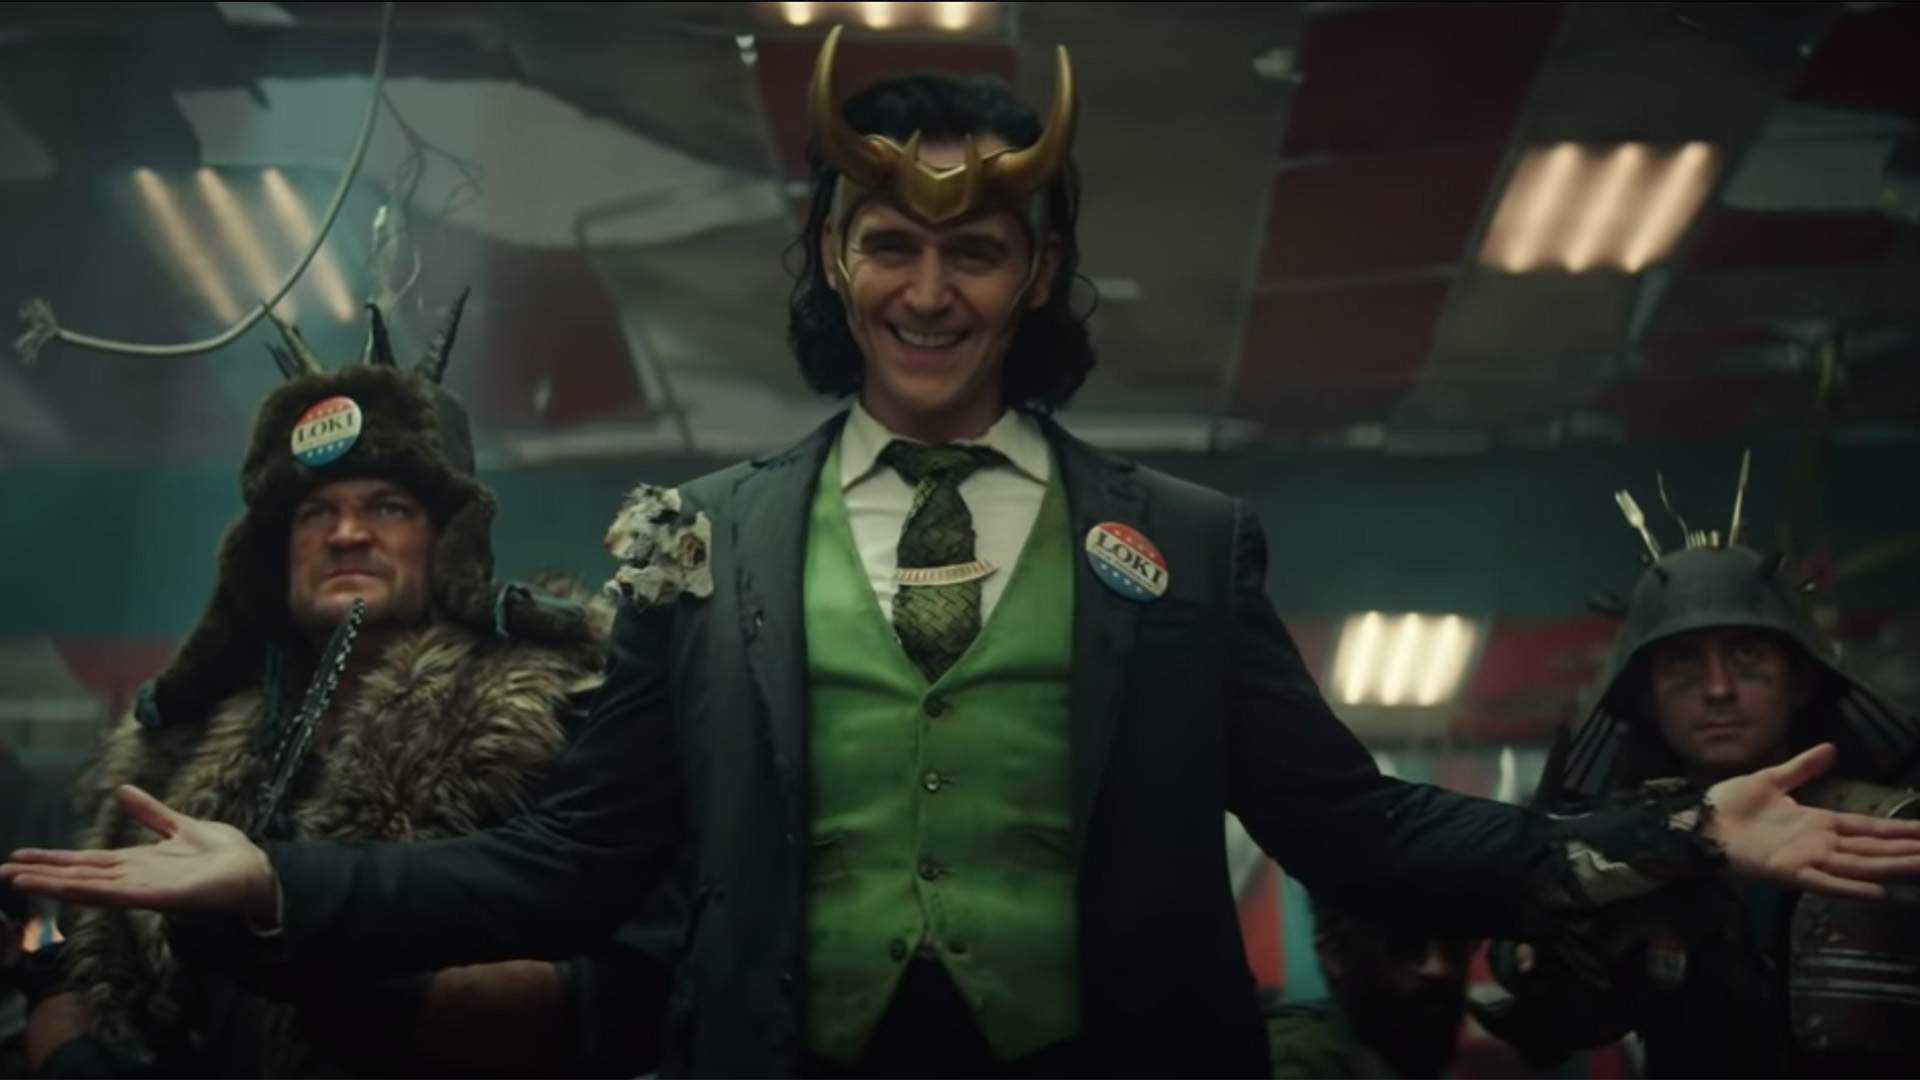 The First Trailers for Disney+'s 'Loki' and 'The Falcon and the Winter Soldier' Shows Are Here